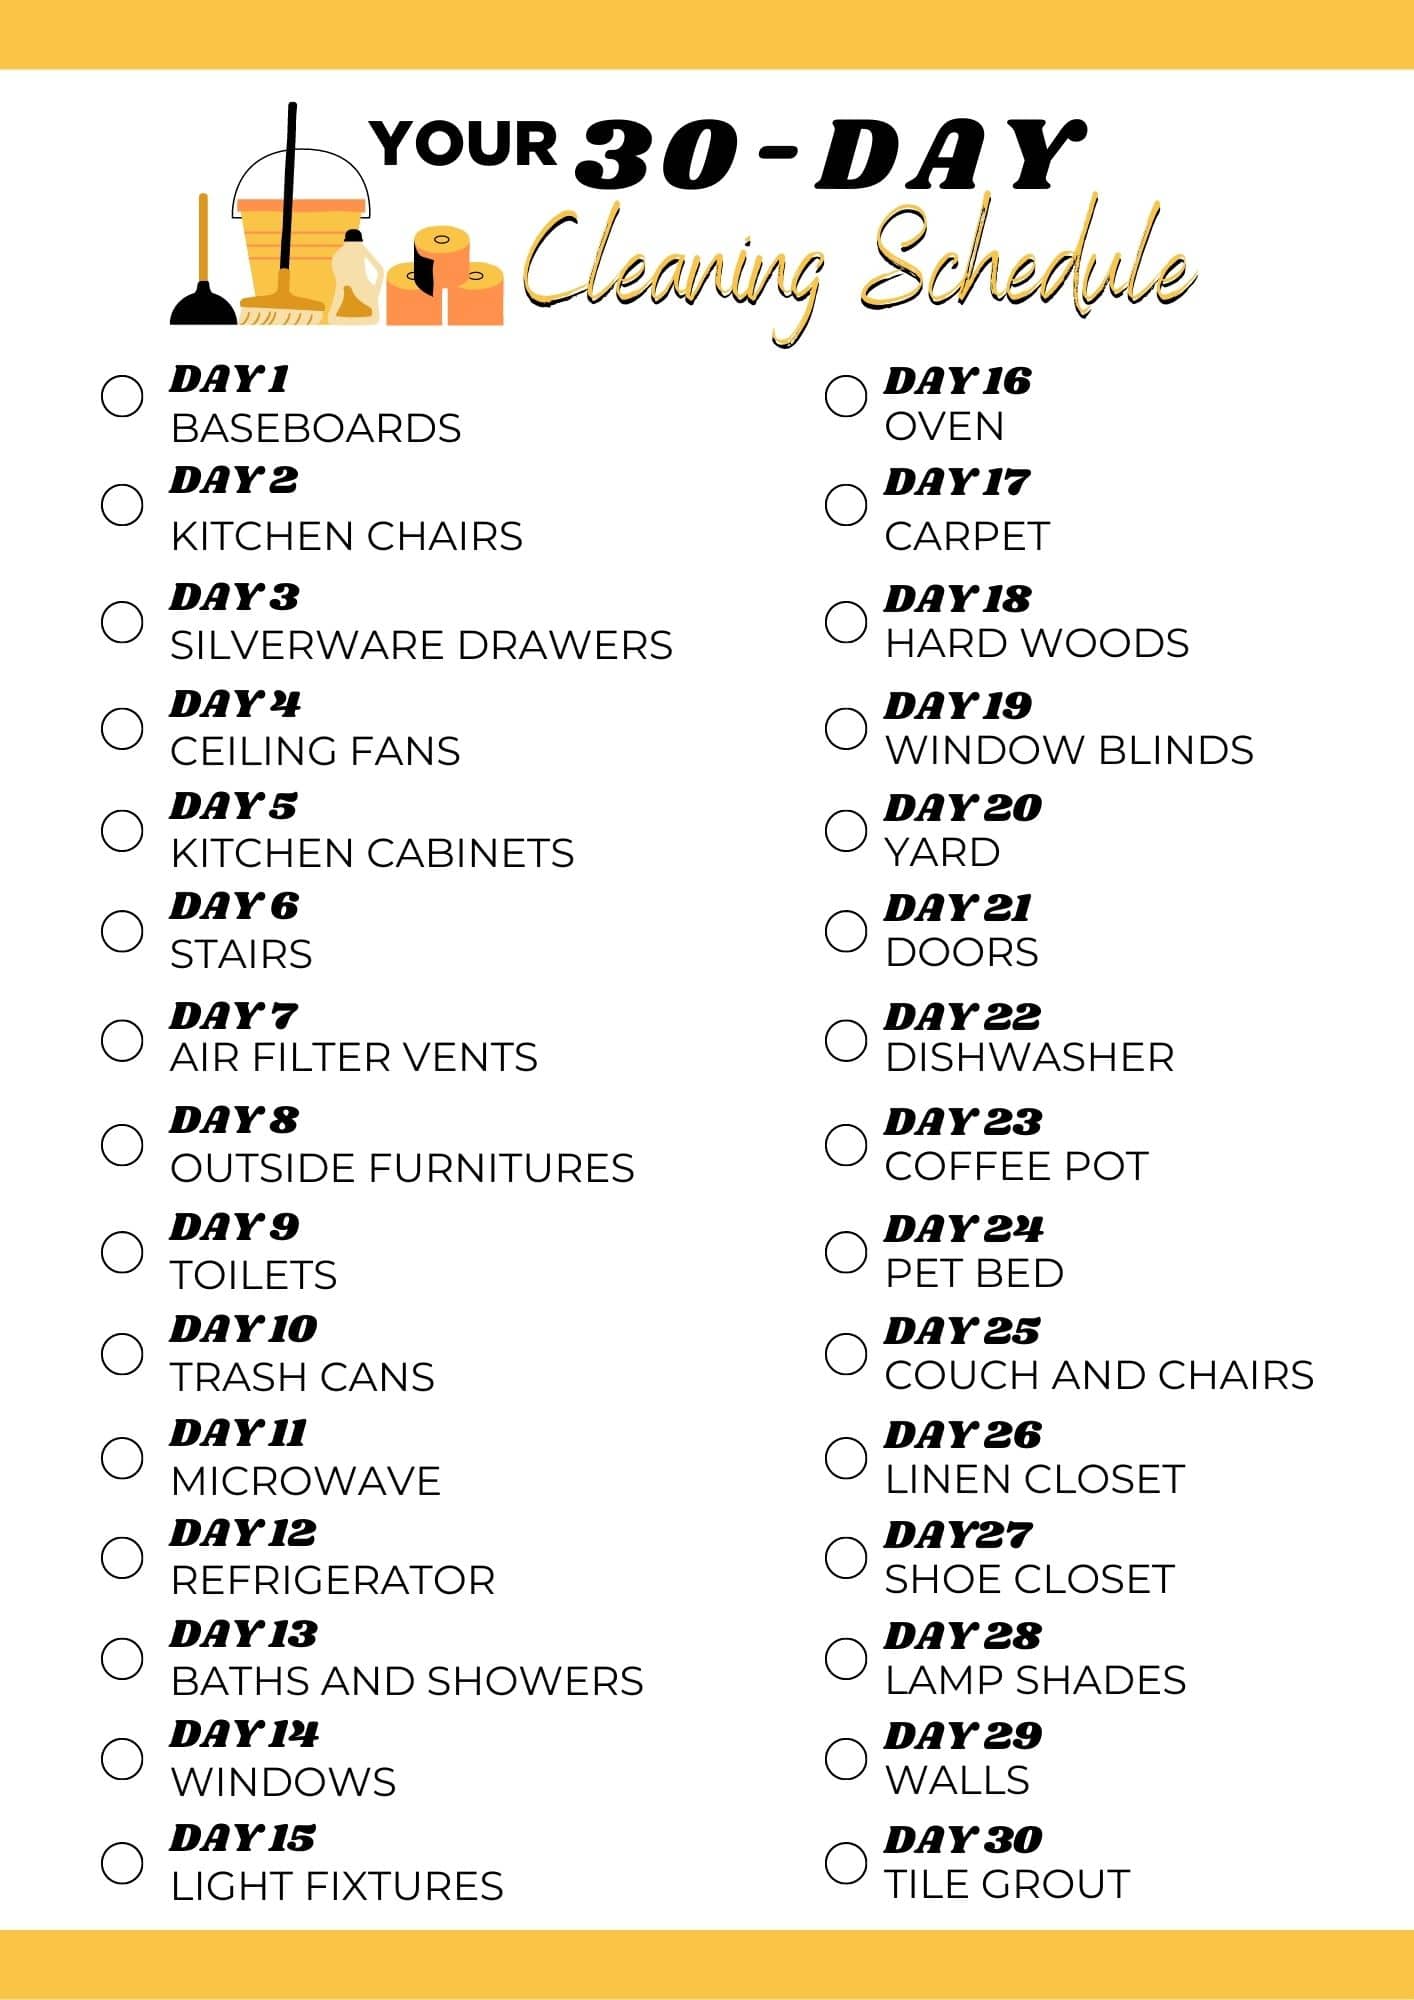 cleaning checklist